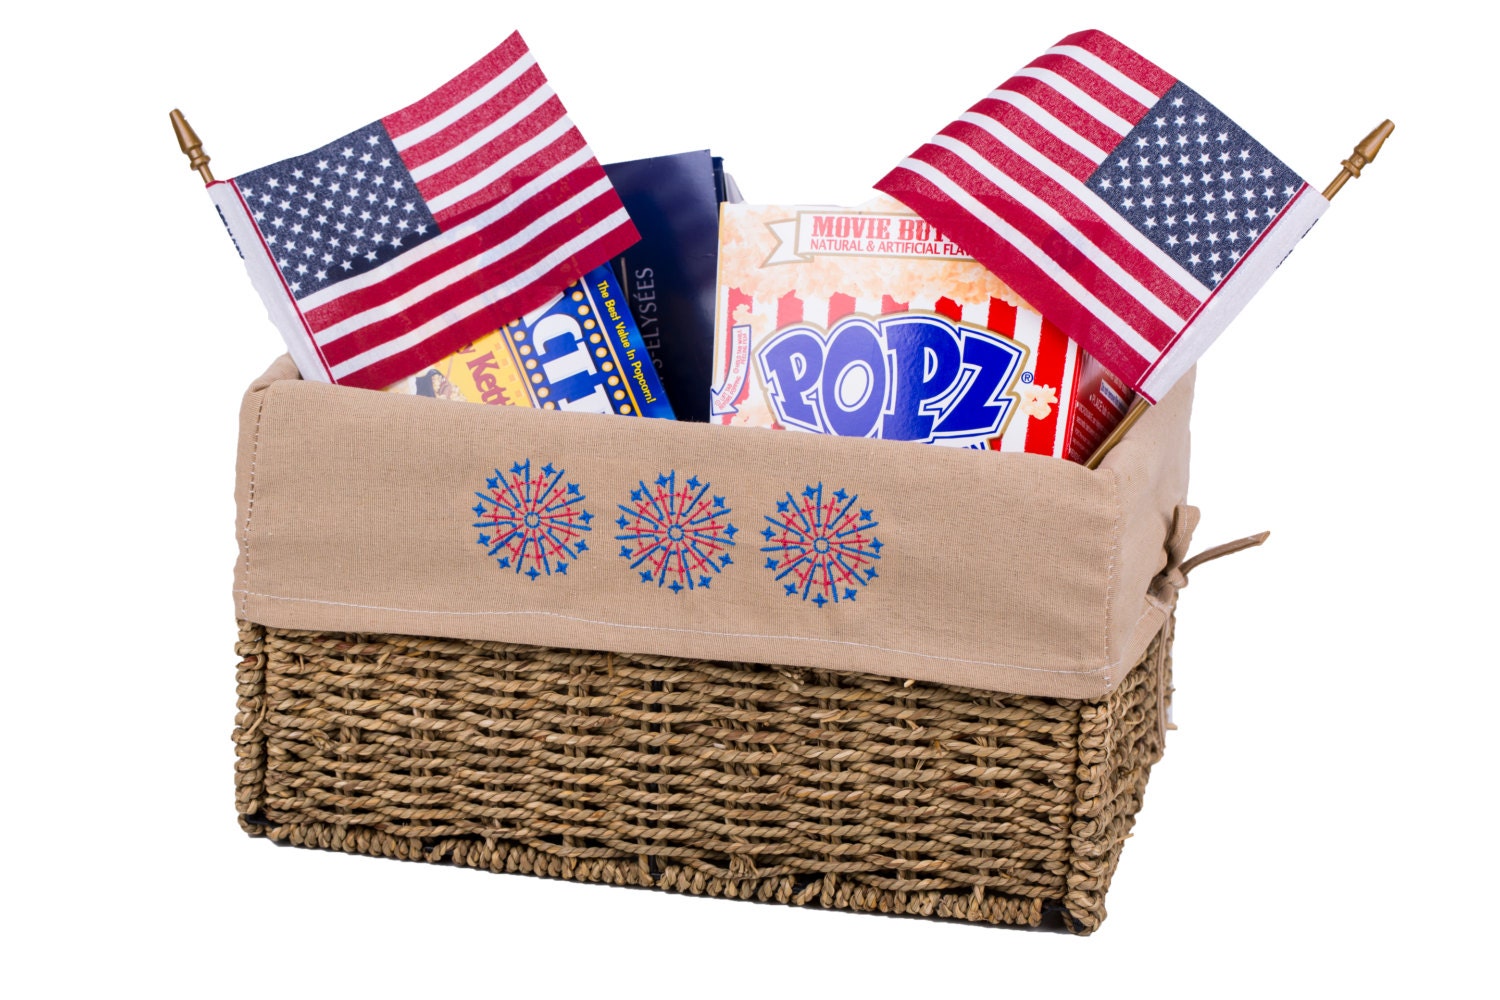 4Th Of July Gift Baskets Ideas : 13 best images about Gift... on